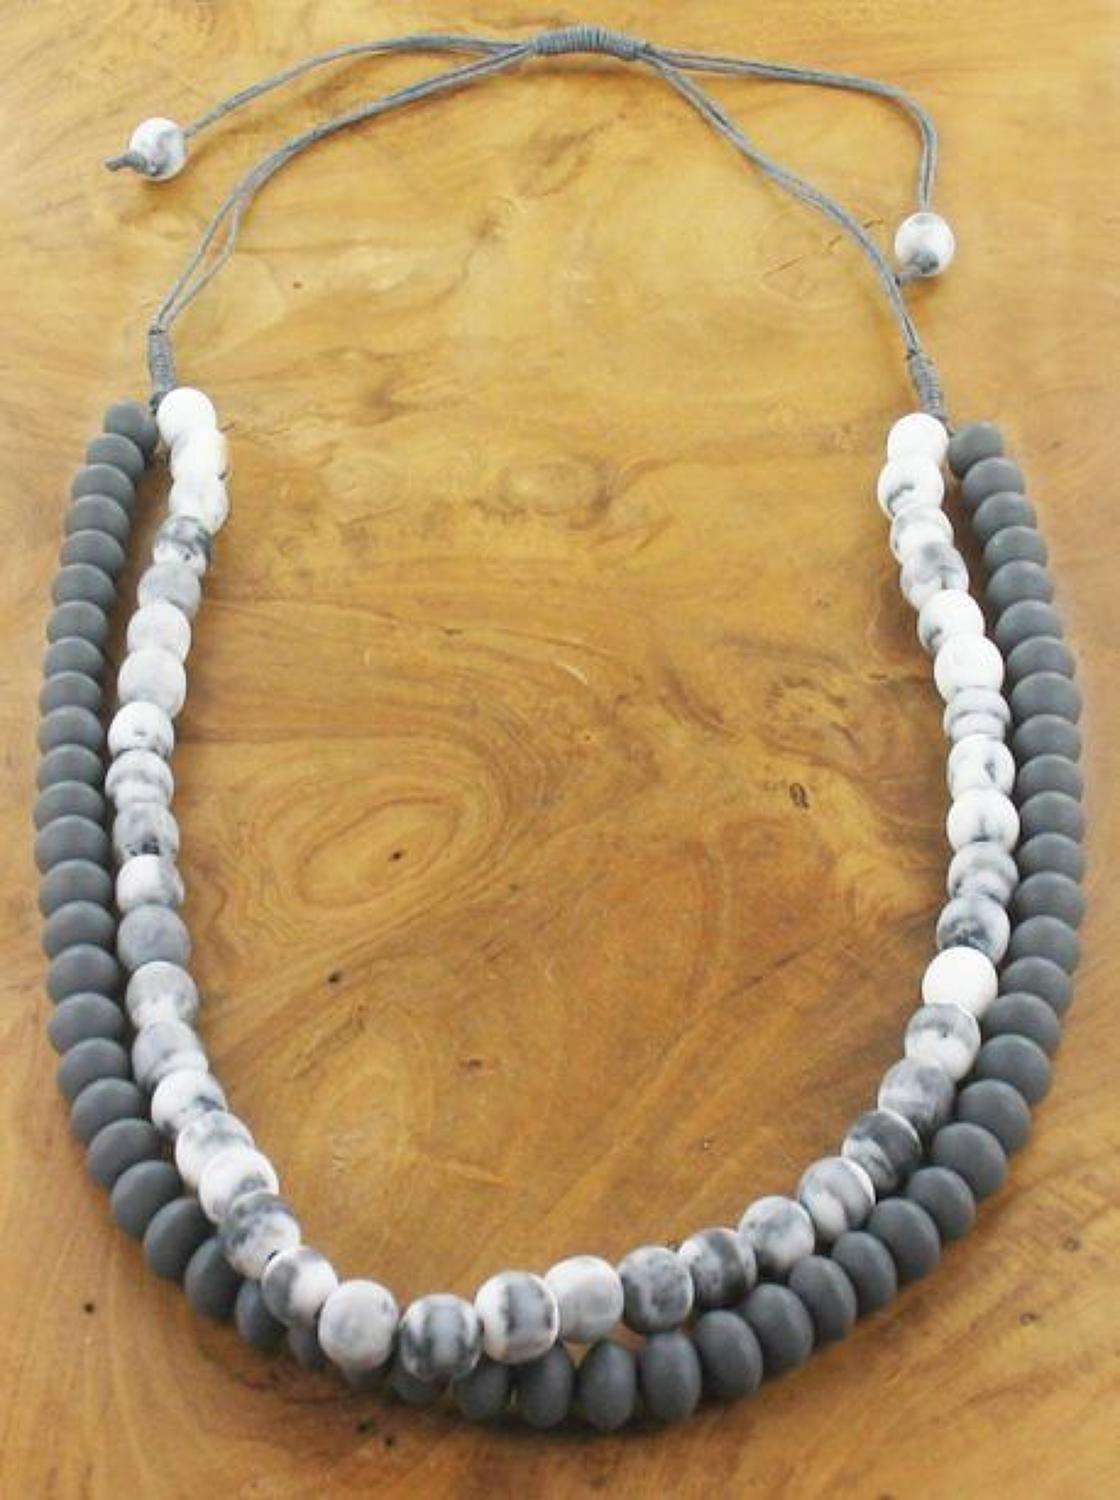 SB - Two strand grey marbled resin necklace